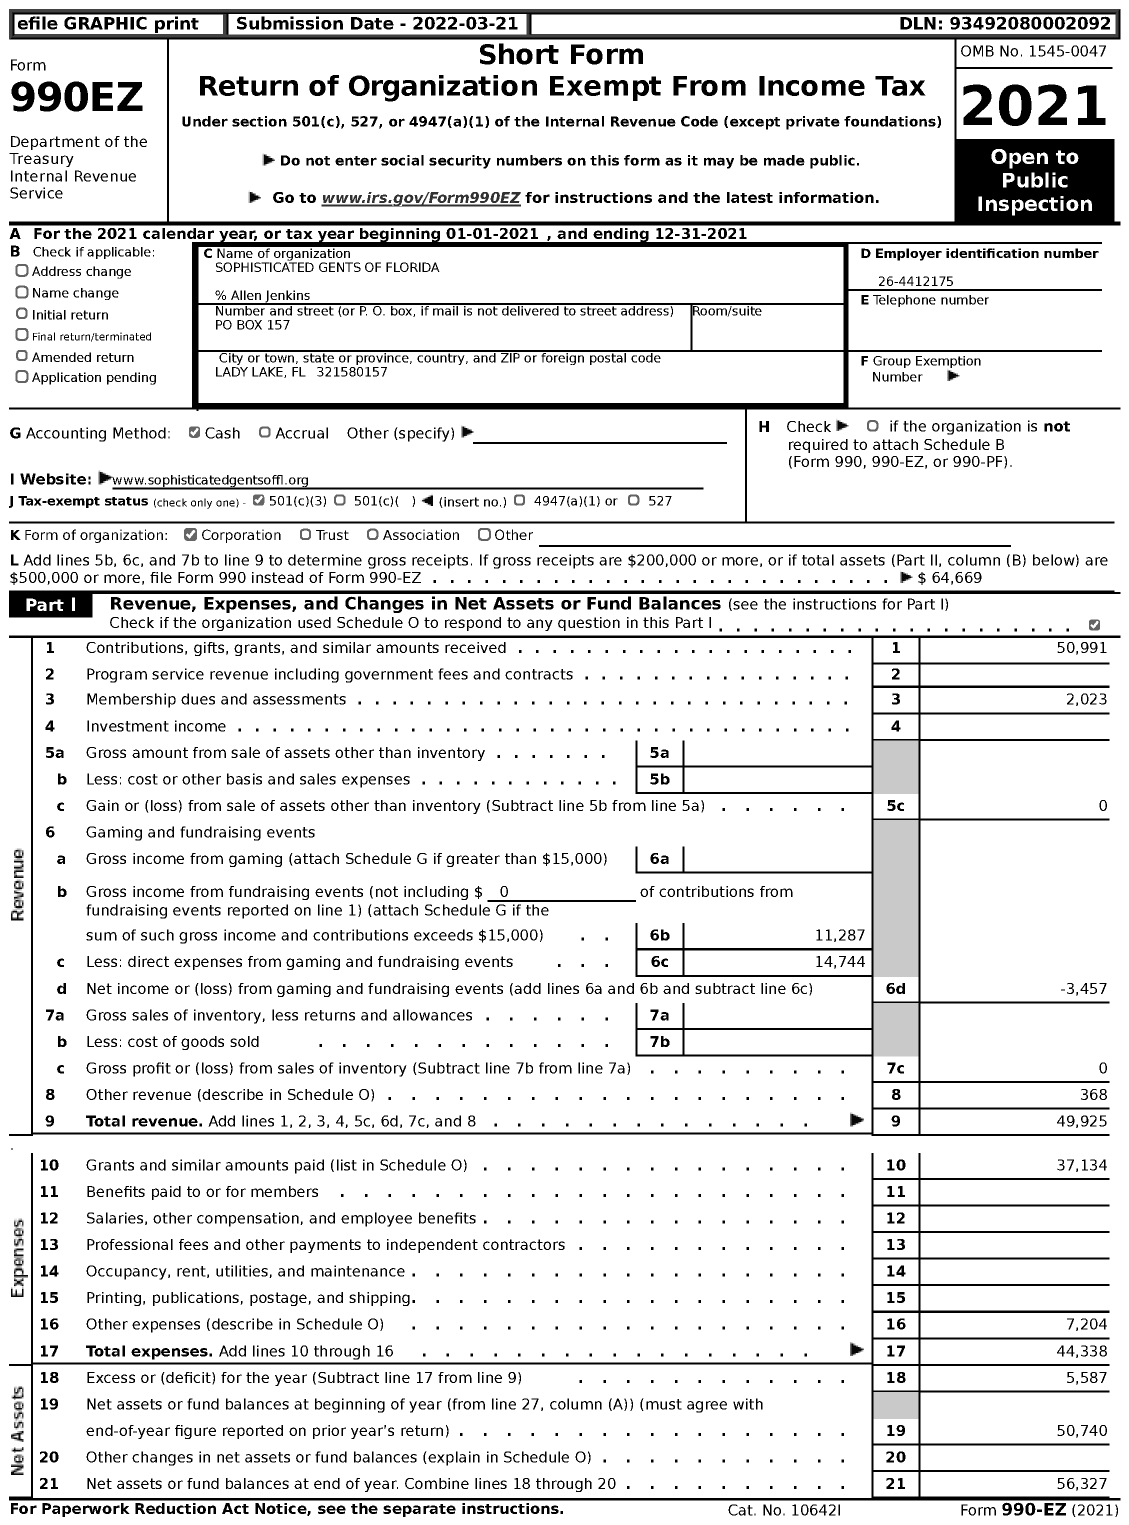 Image of first page of 2021 Form 990EZ for Sophisticated Gents of Florida